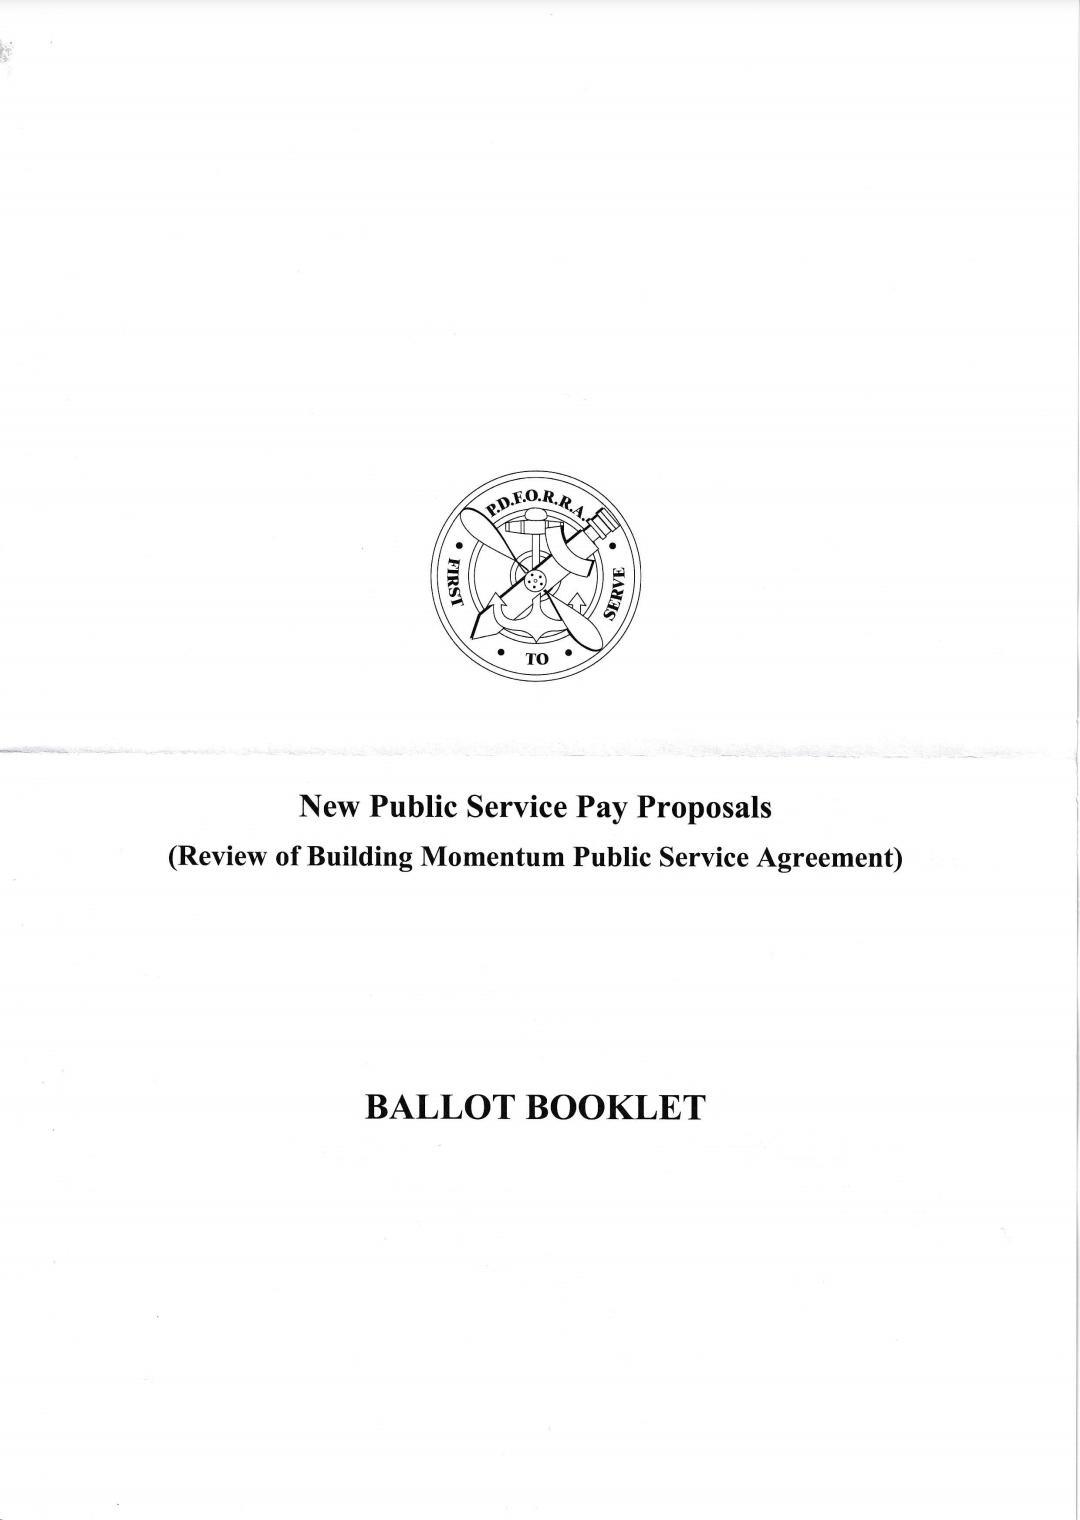 Ballot Booklet - Review of Building Momentum Public Service Agreement